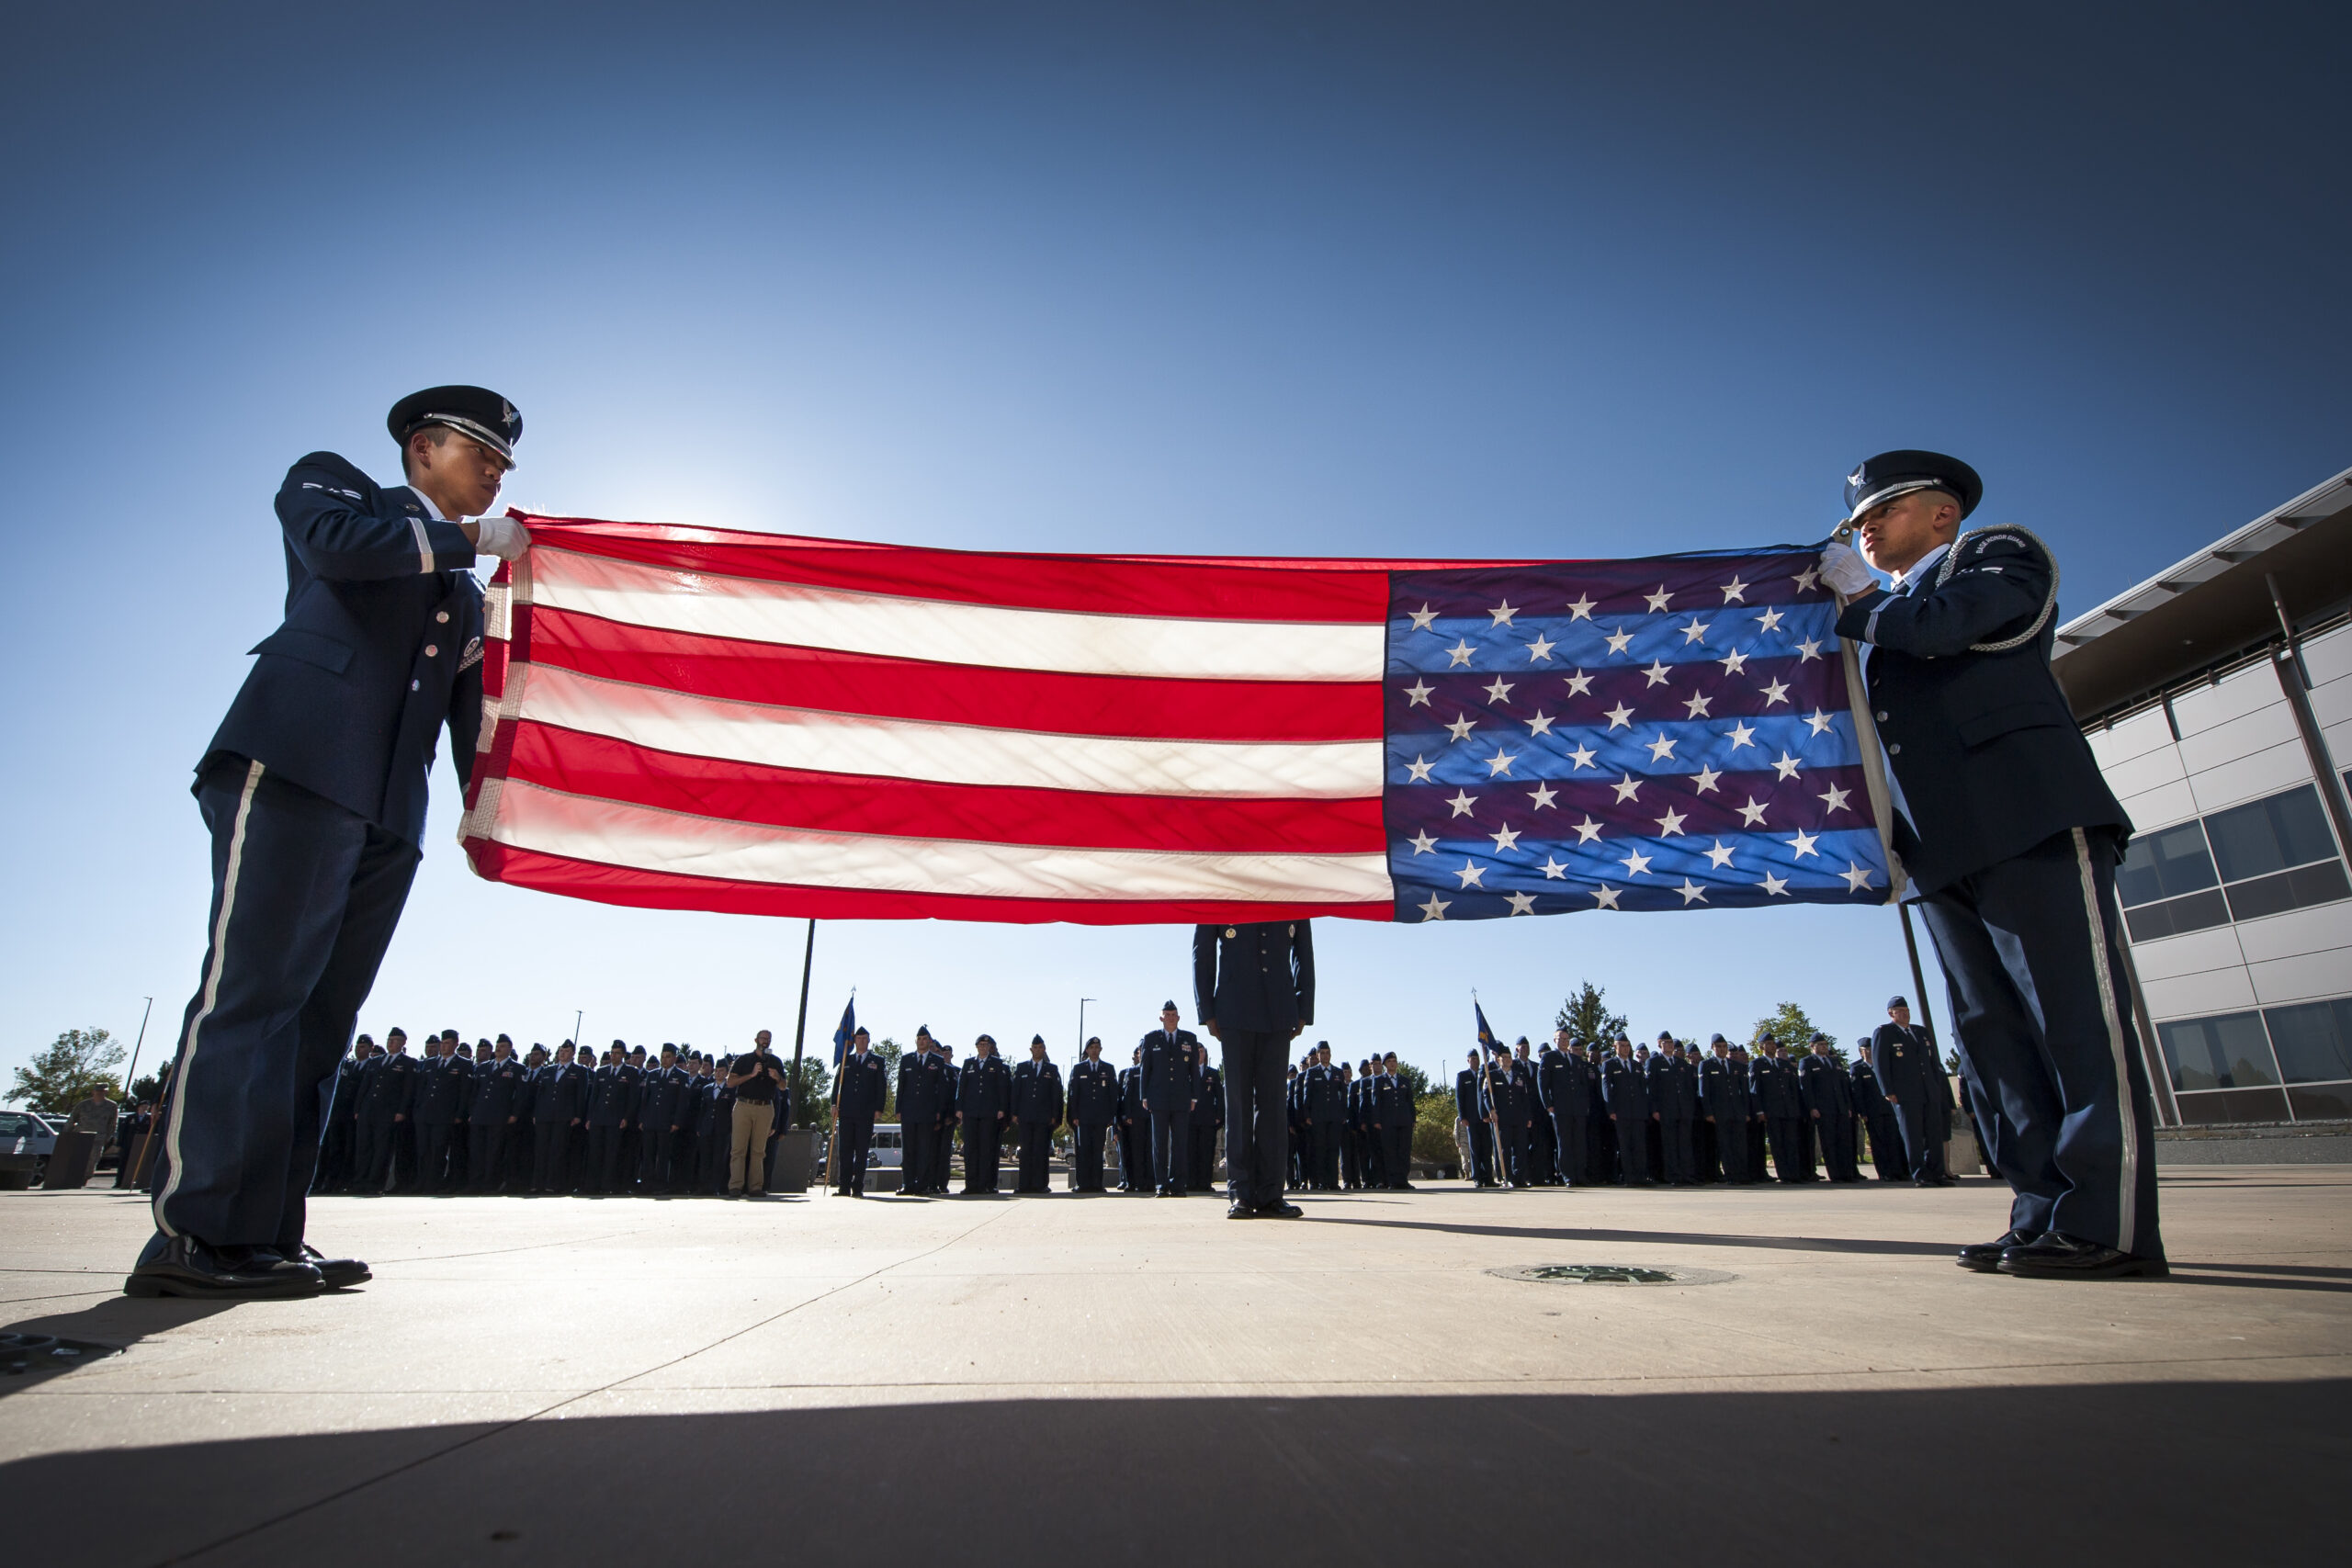 ceremony at colorado air force bases